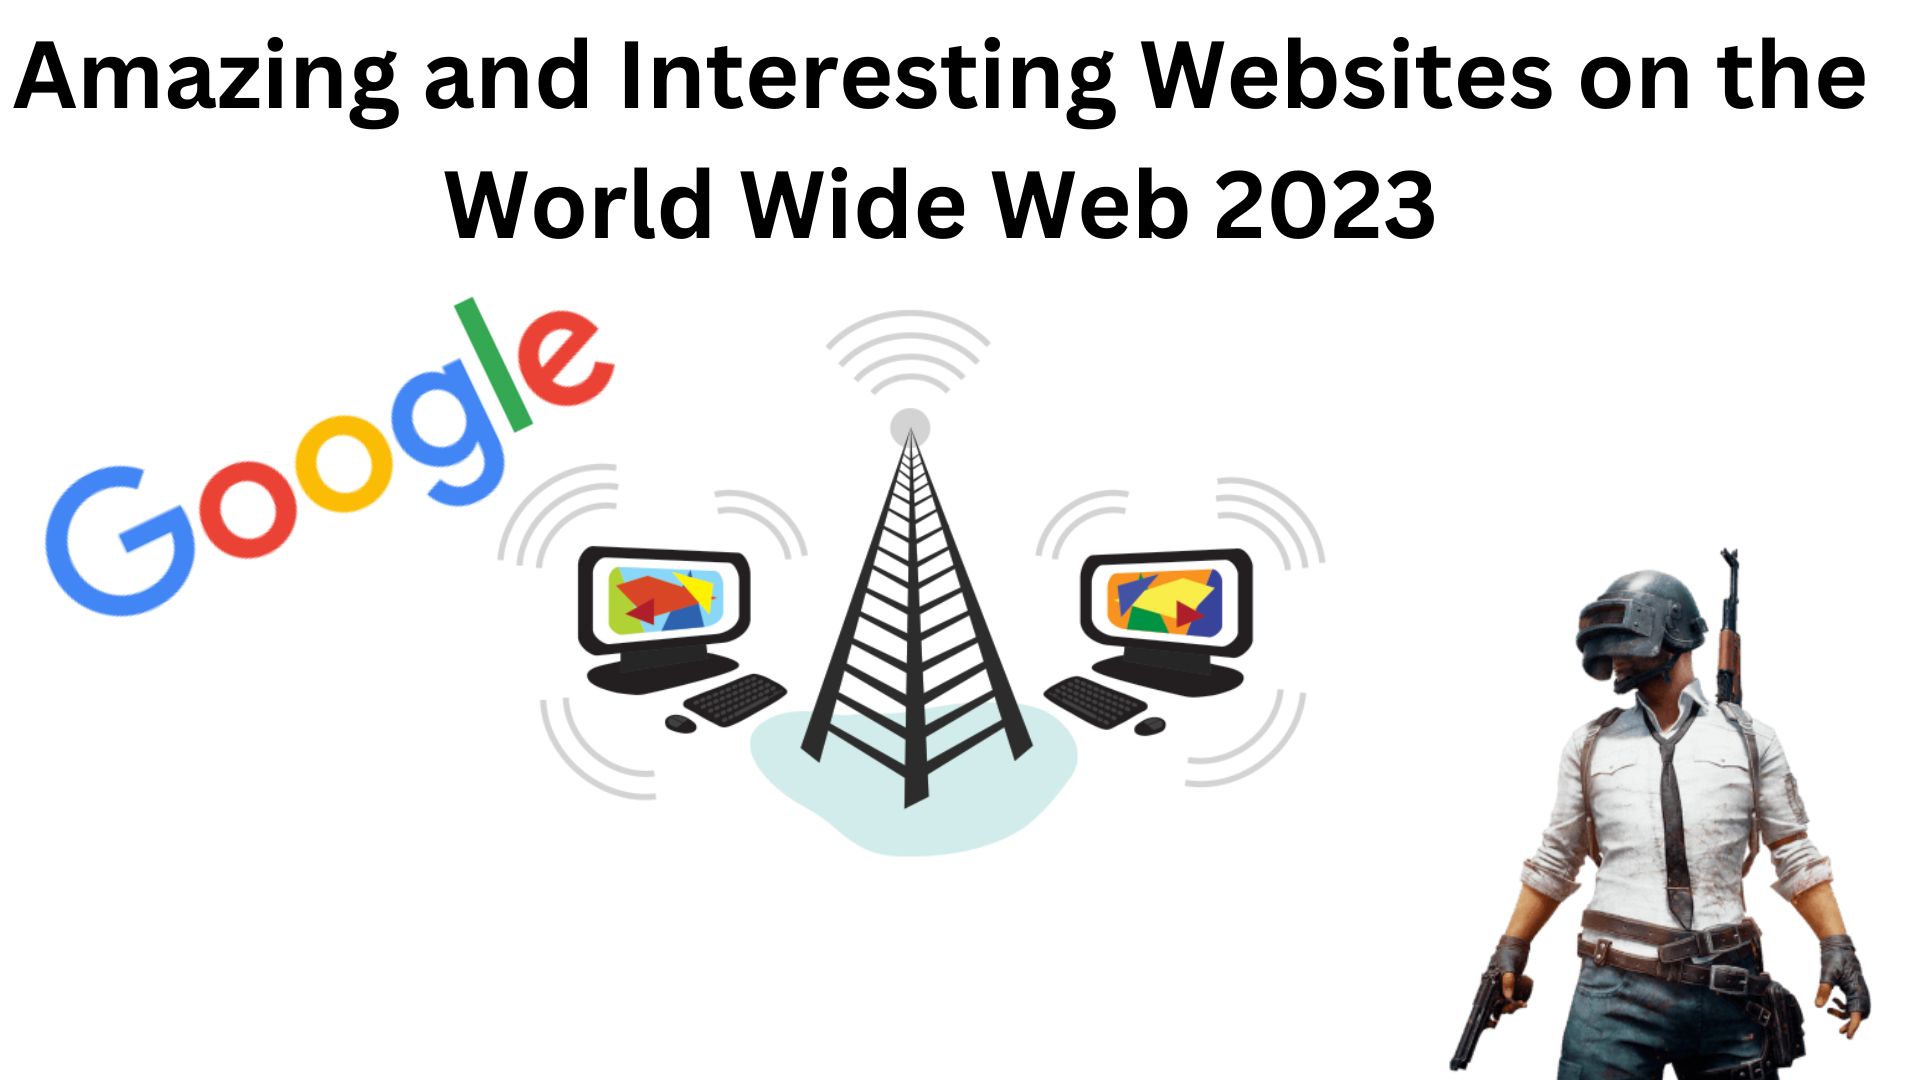 Amazing and interesting websites on the world wide web 2023